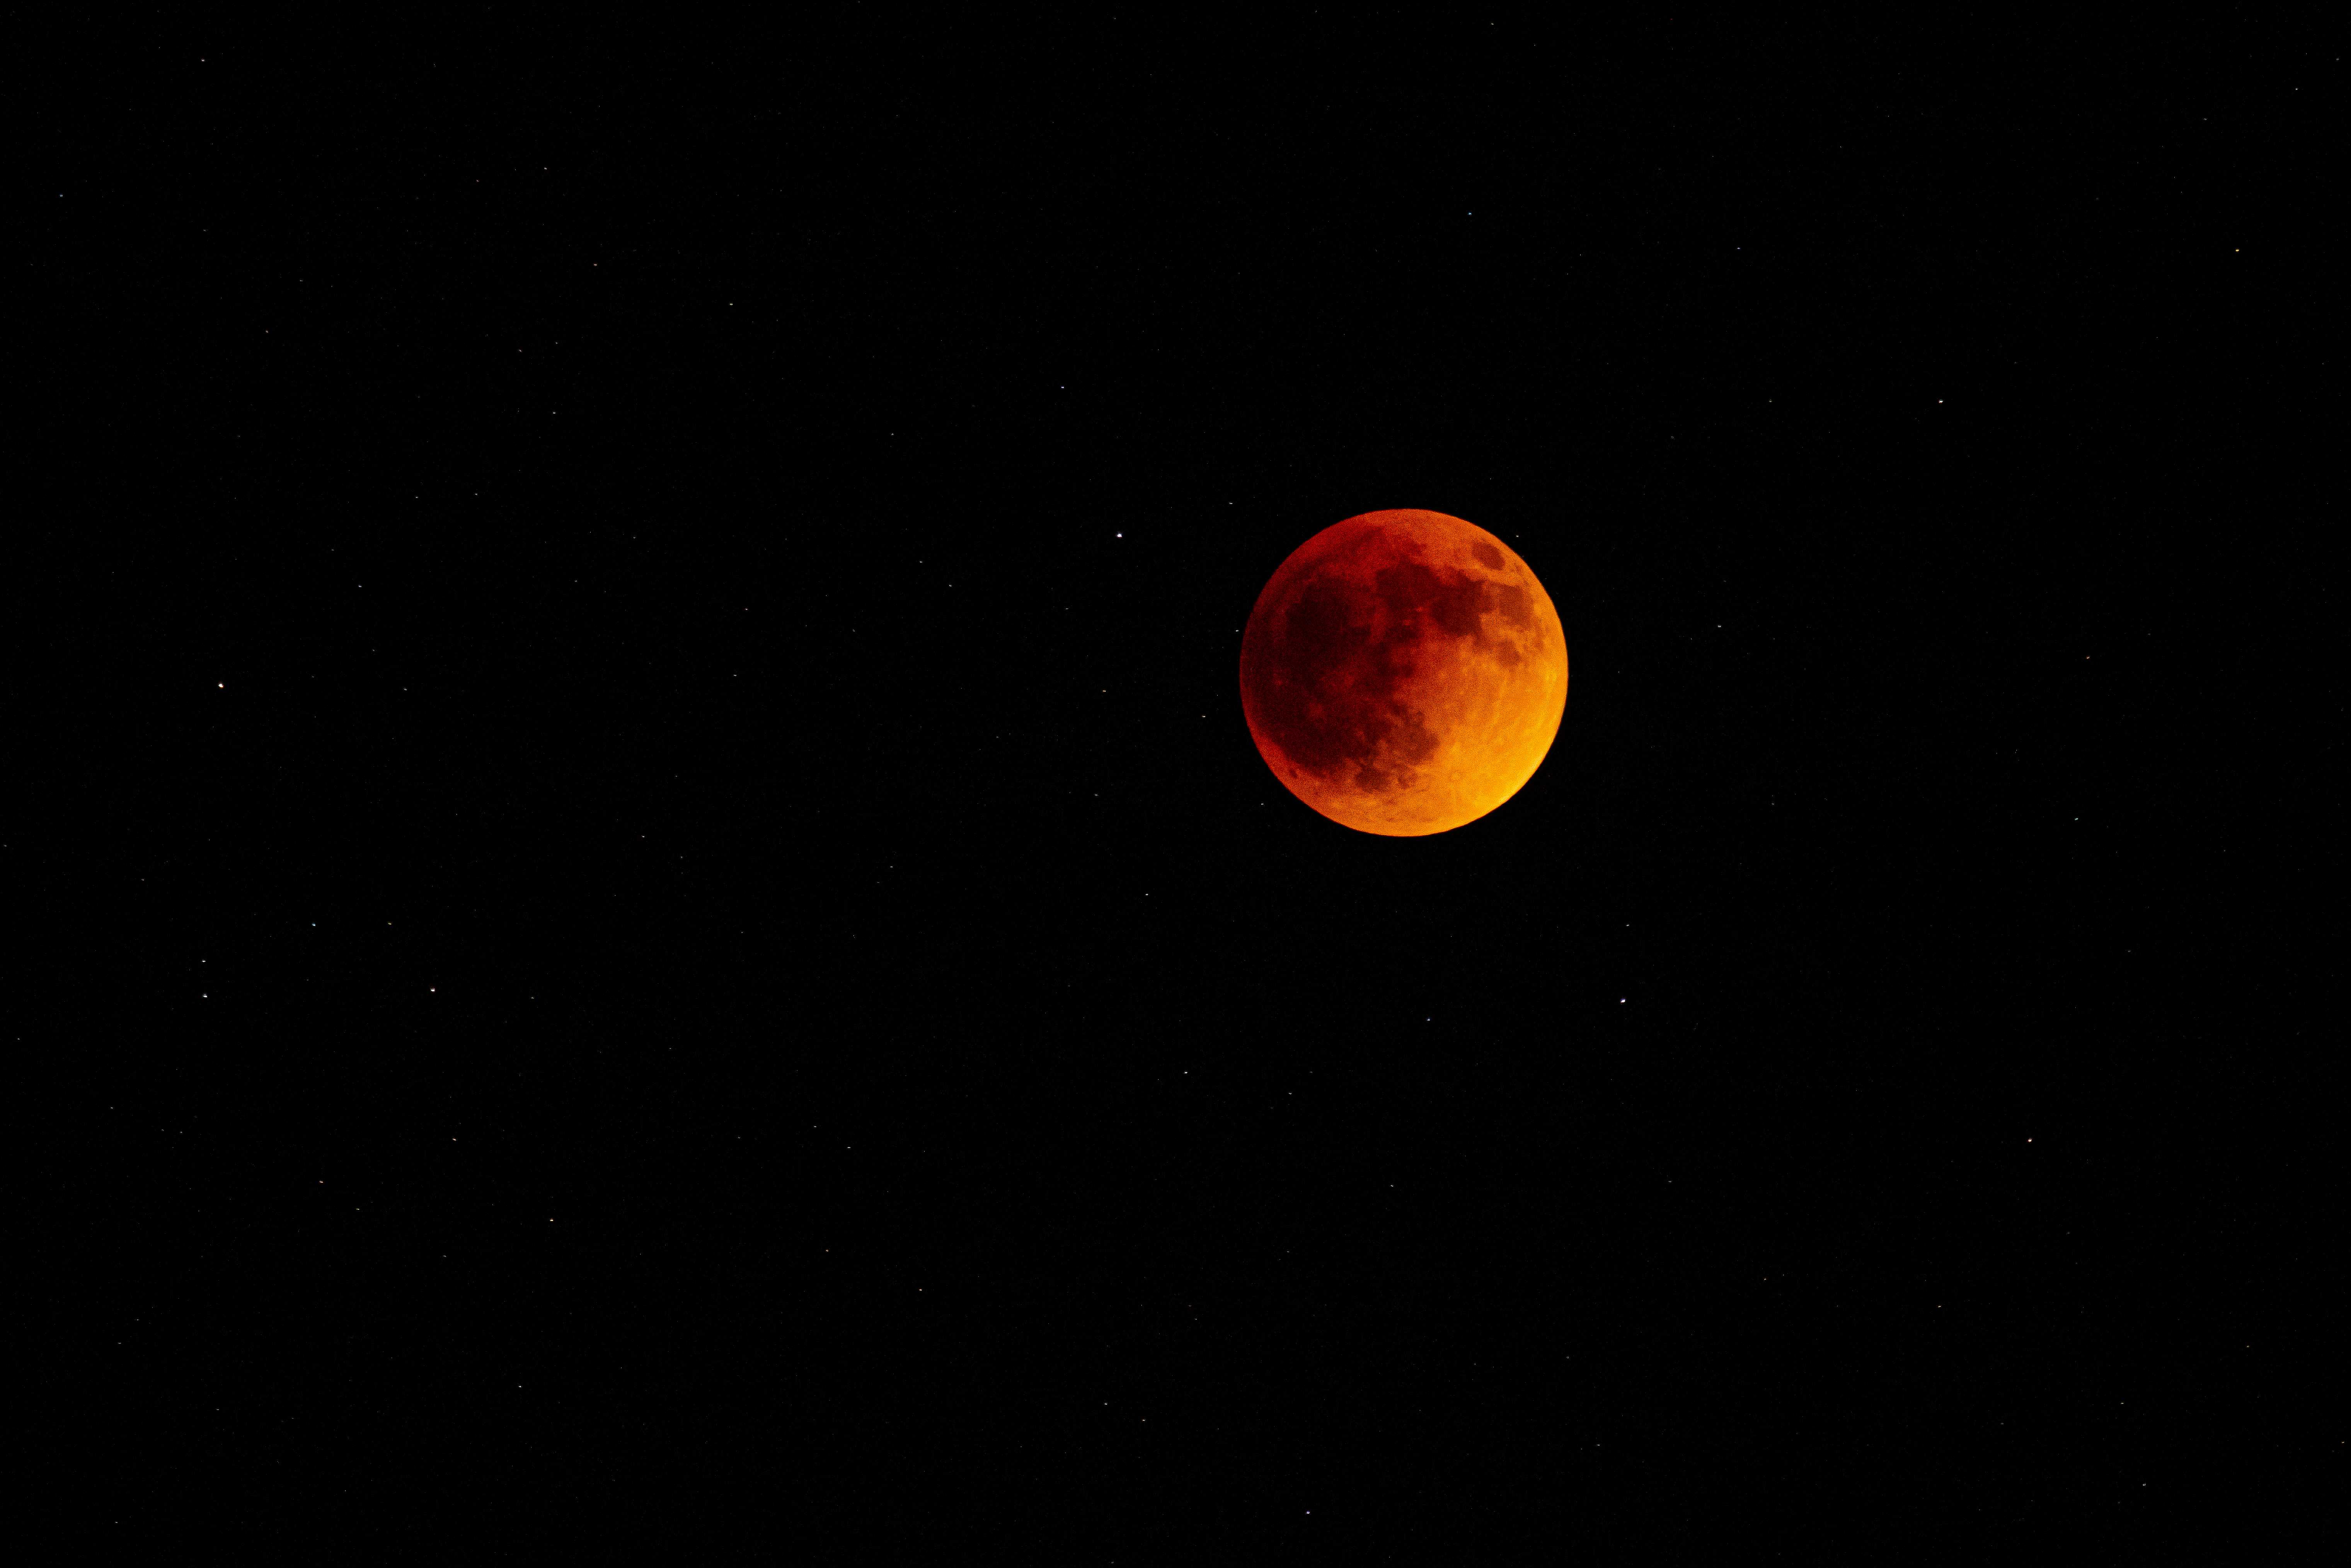 The full moon at a total eclipse shines a dull orange in the sky surrounded by stars.